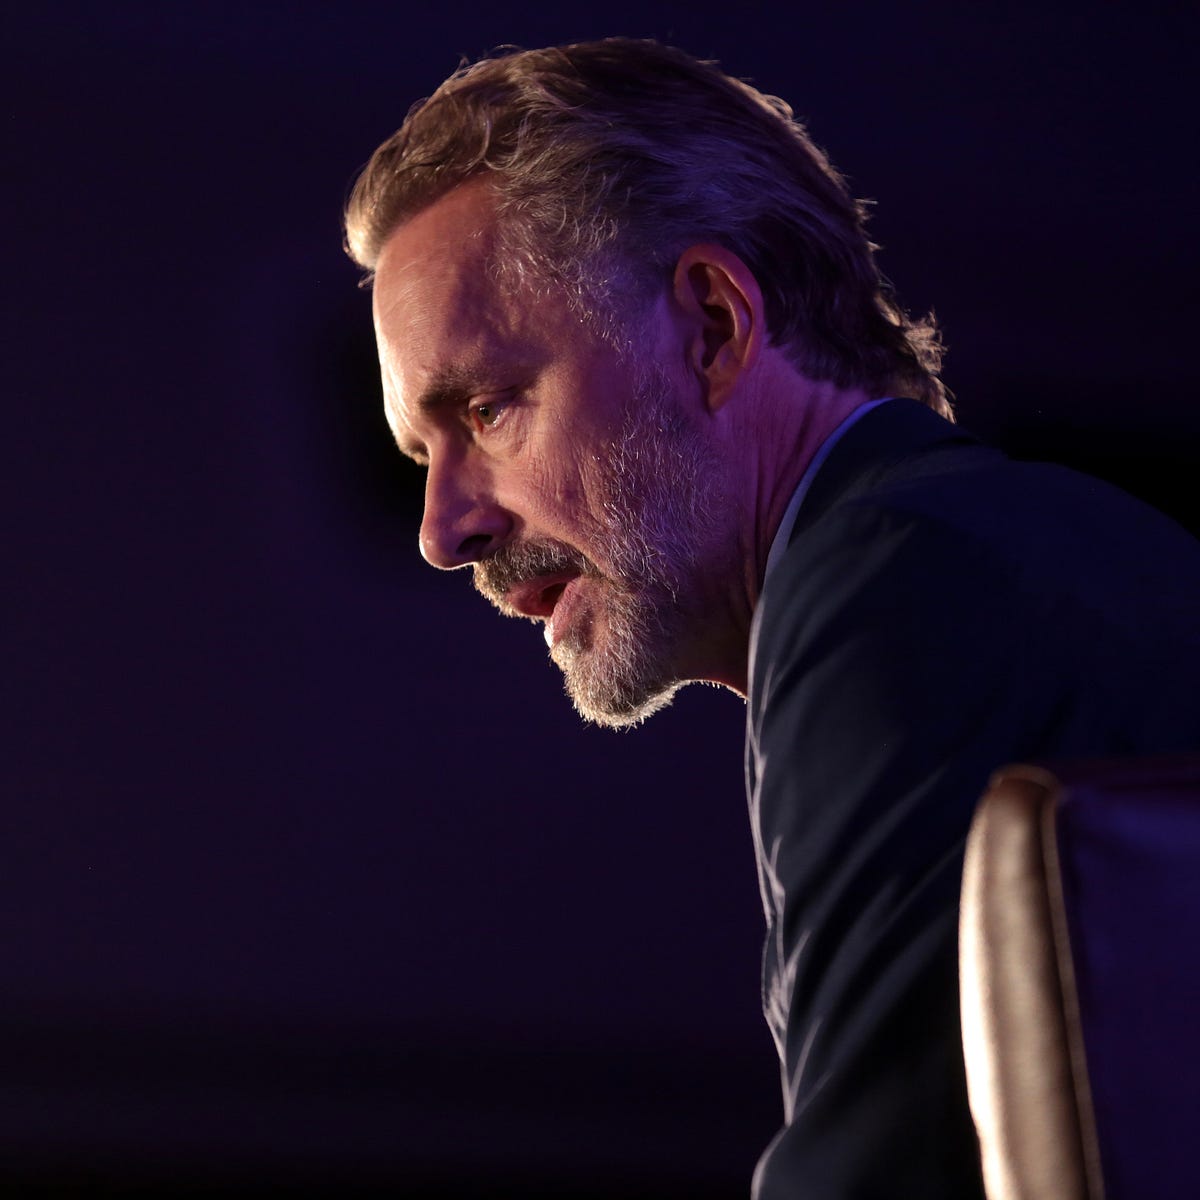 Jordan Peterson Is Divisive Because of His Weaknesses, Not His Strengths |  by Michael Barnard | The Future is Electric | Medium